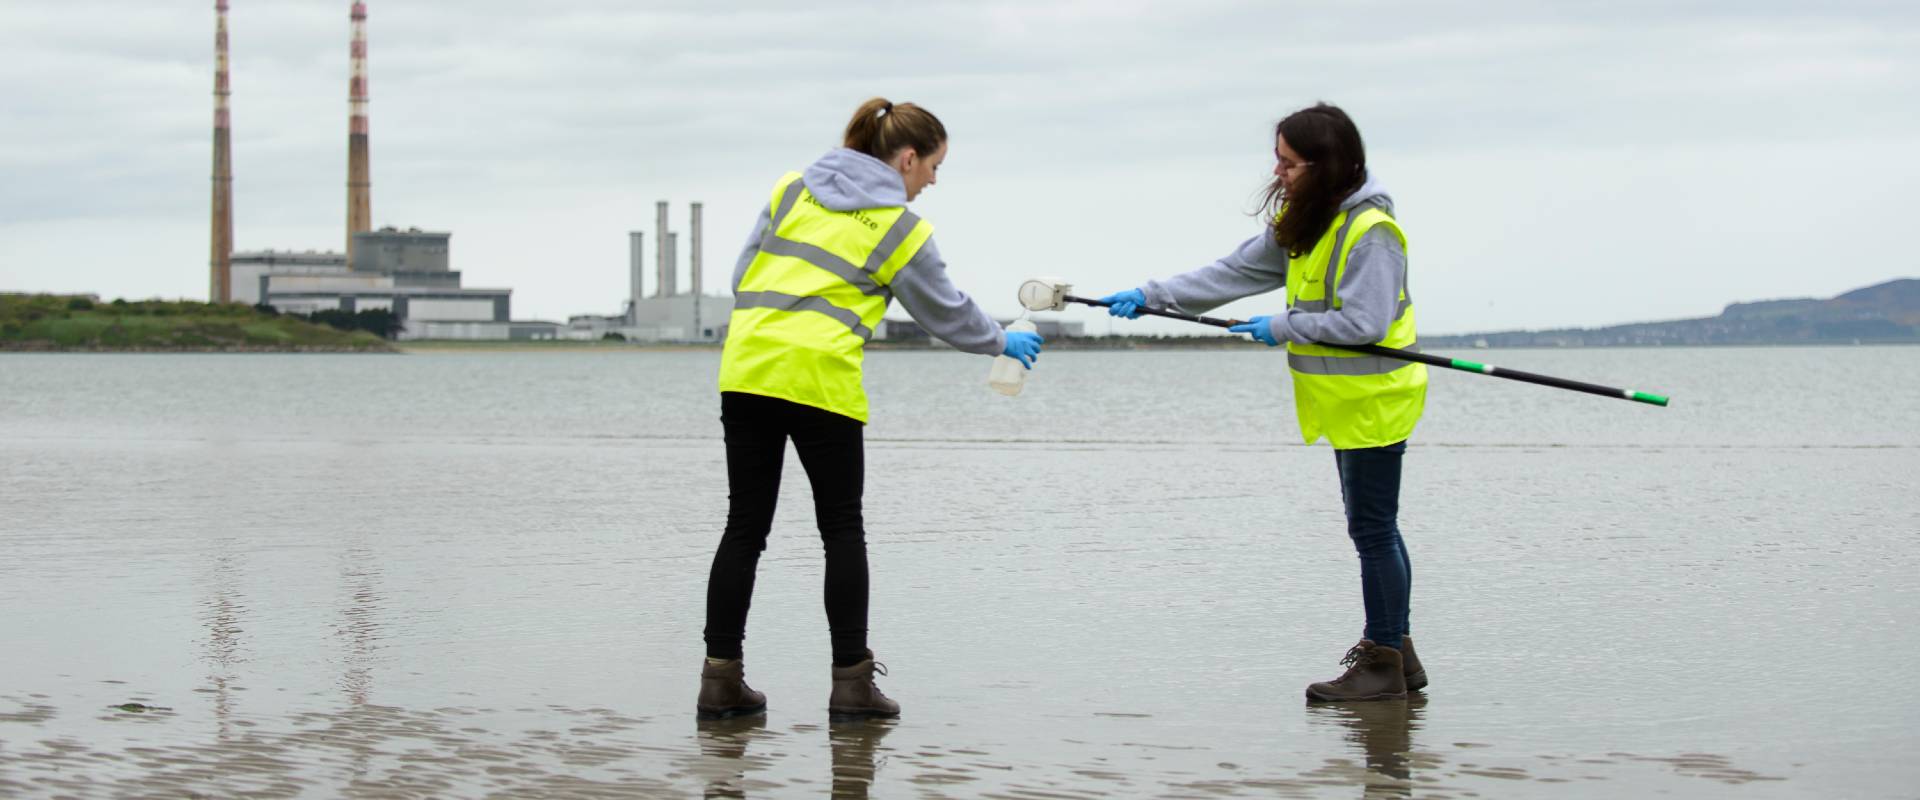 Students collecting sample on Sandymount Strand